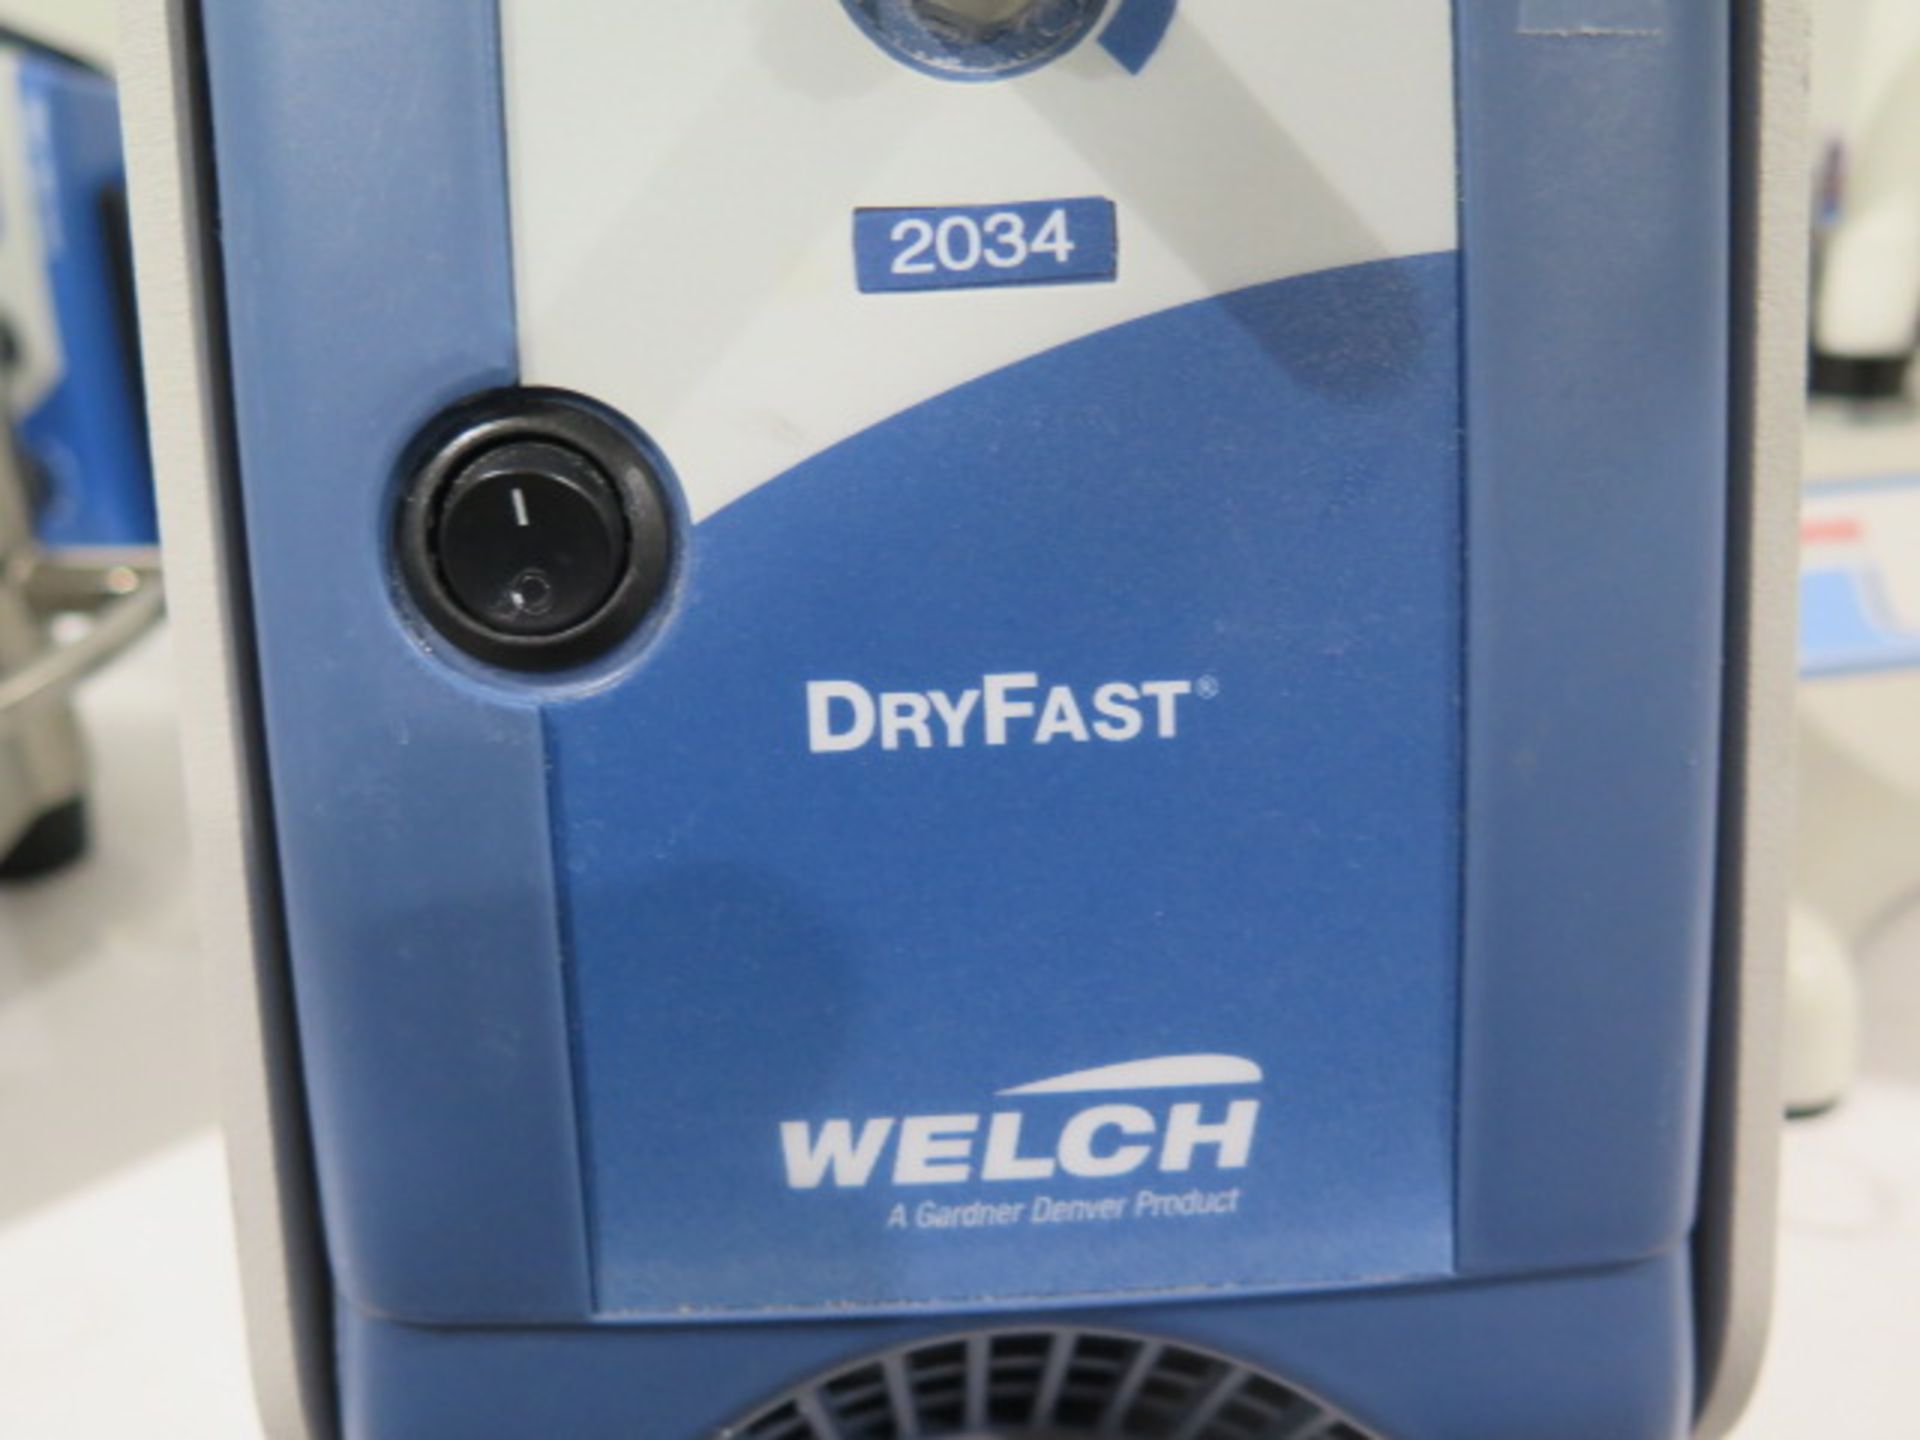 Welch 2034B-01 DryFast 0.9 cfm Oil-Free Vacuum Pump (SOLD AS-IS - NO WARRANTY) - Image 5 of 5